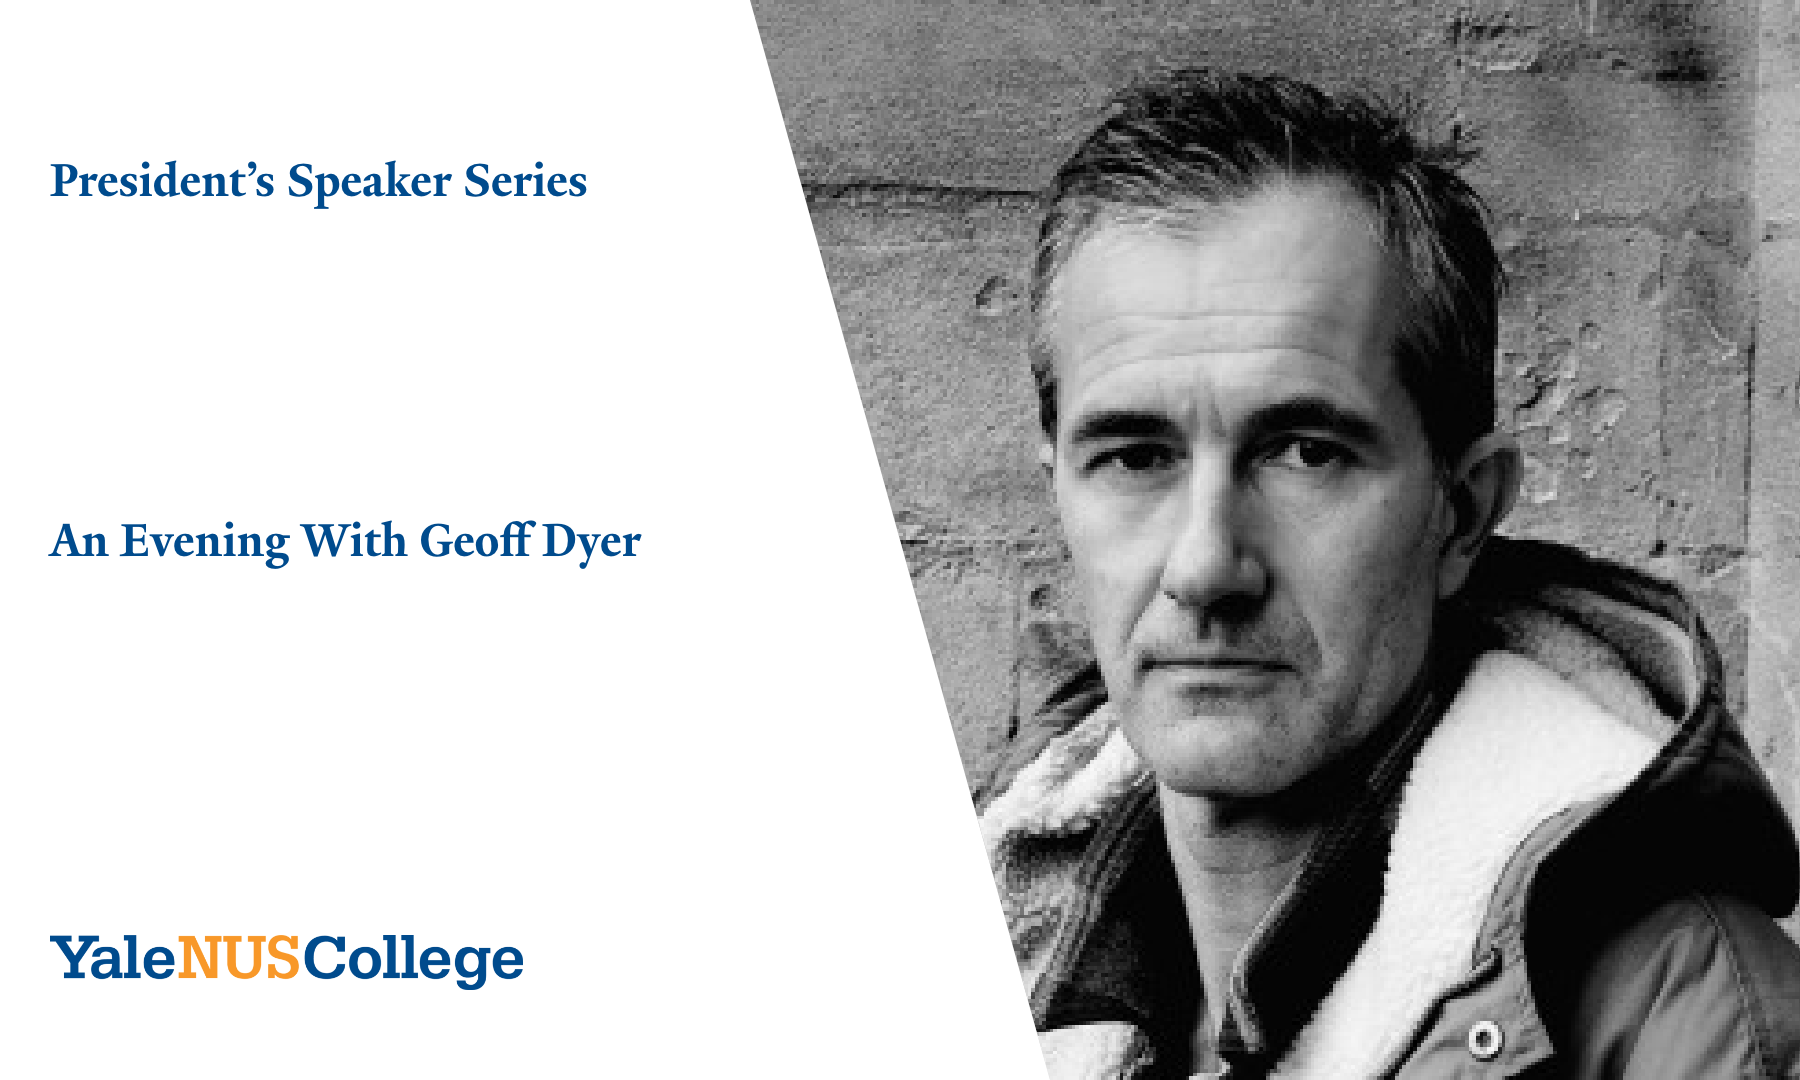 An Evening With Geoff Dyer